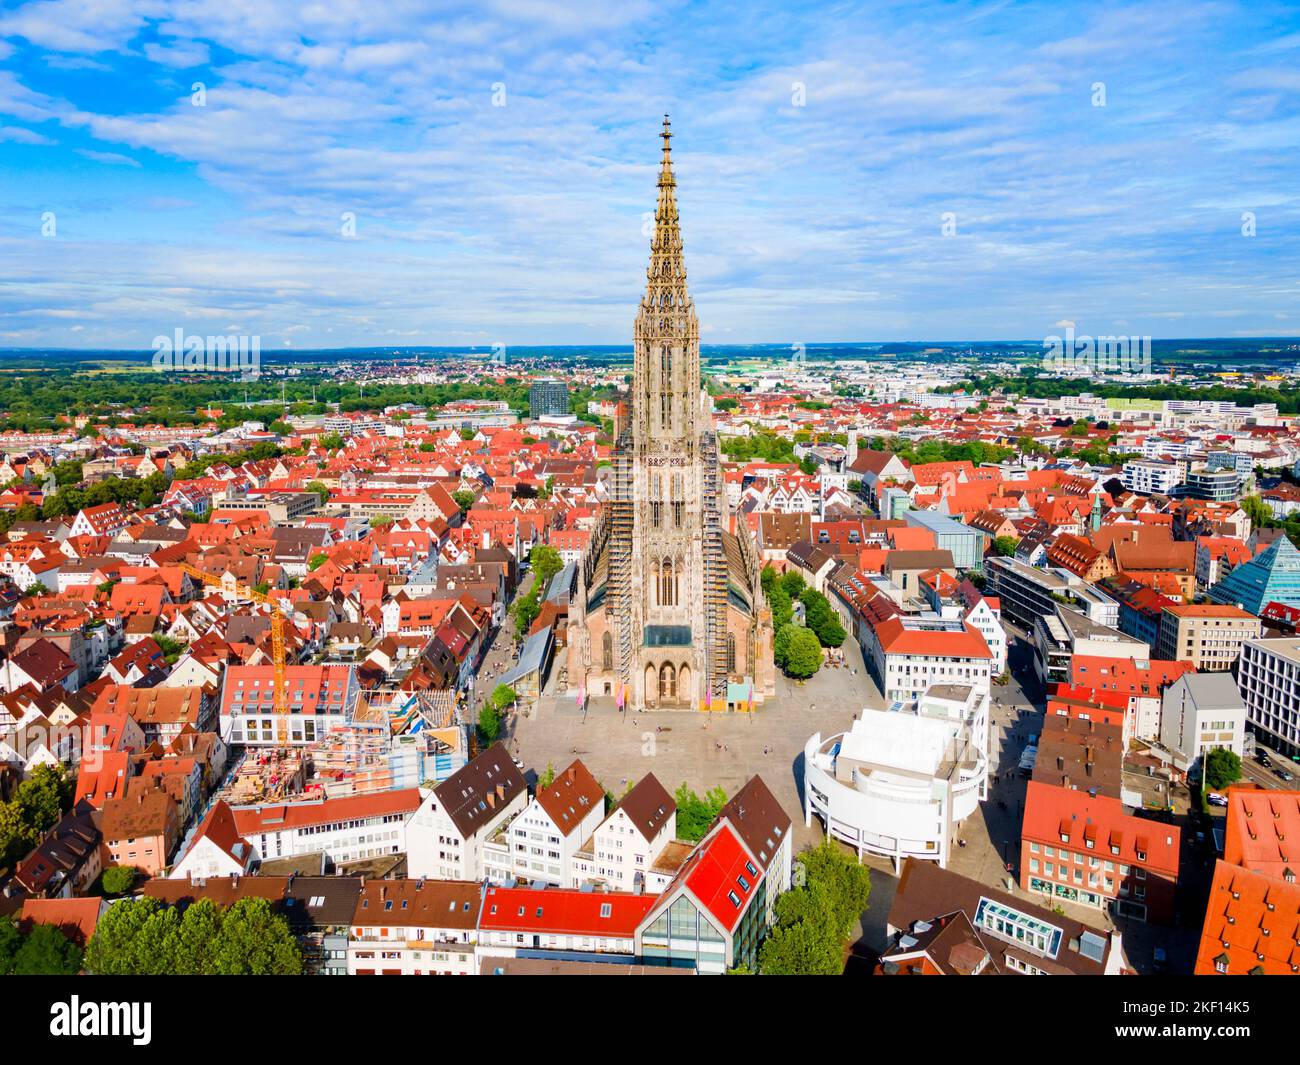 Ulm Minster or Ulmer Munster Cathedral aerial panoramic view, a Lutheran church located in Ulm, Germany. It is currently the tallest church in the wor Stock Photo